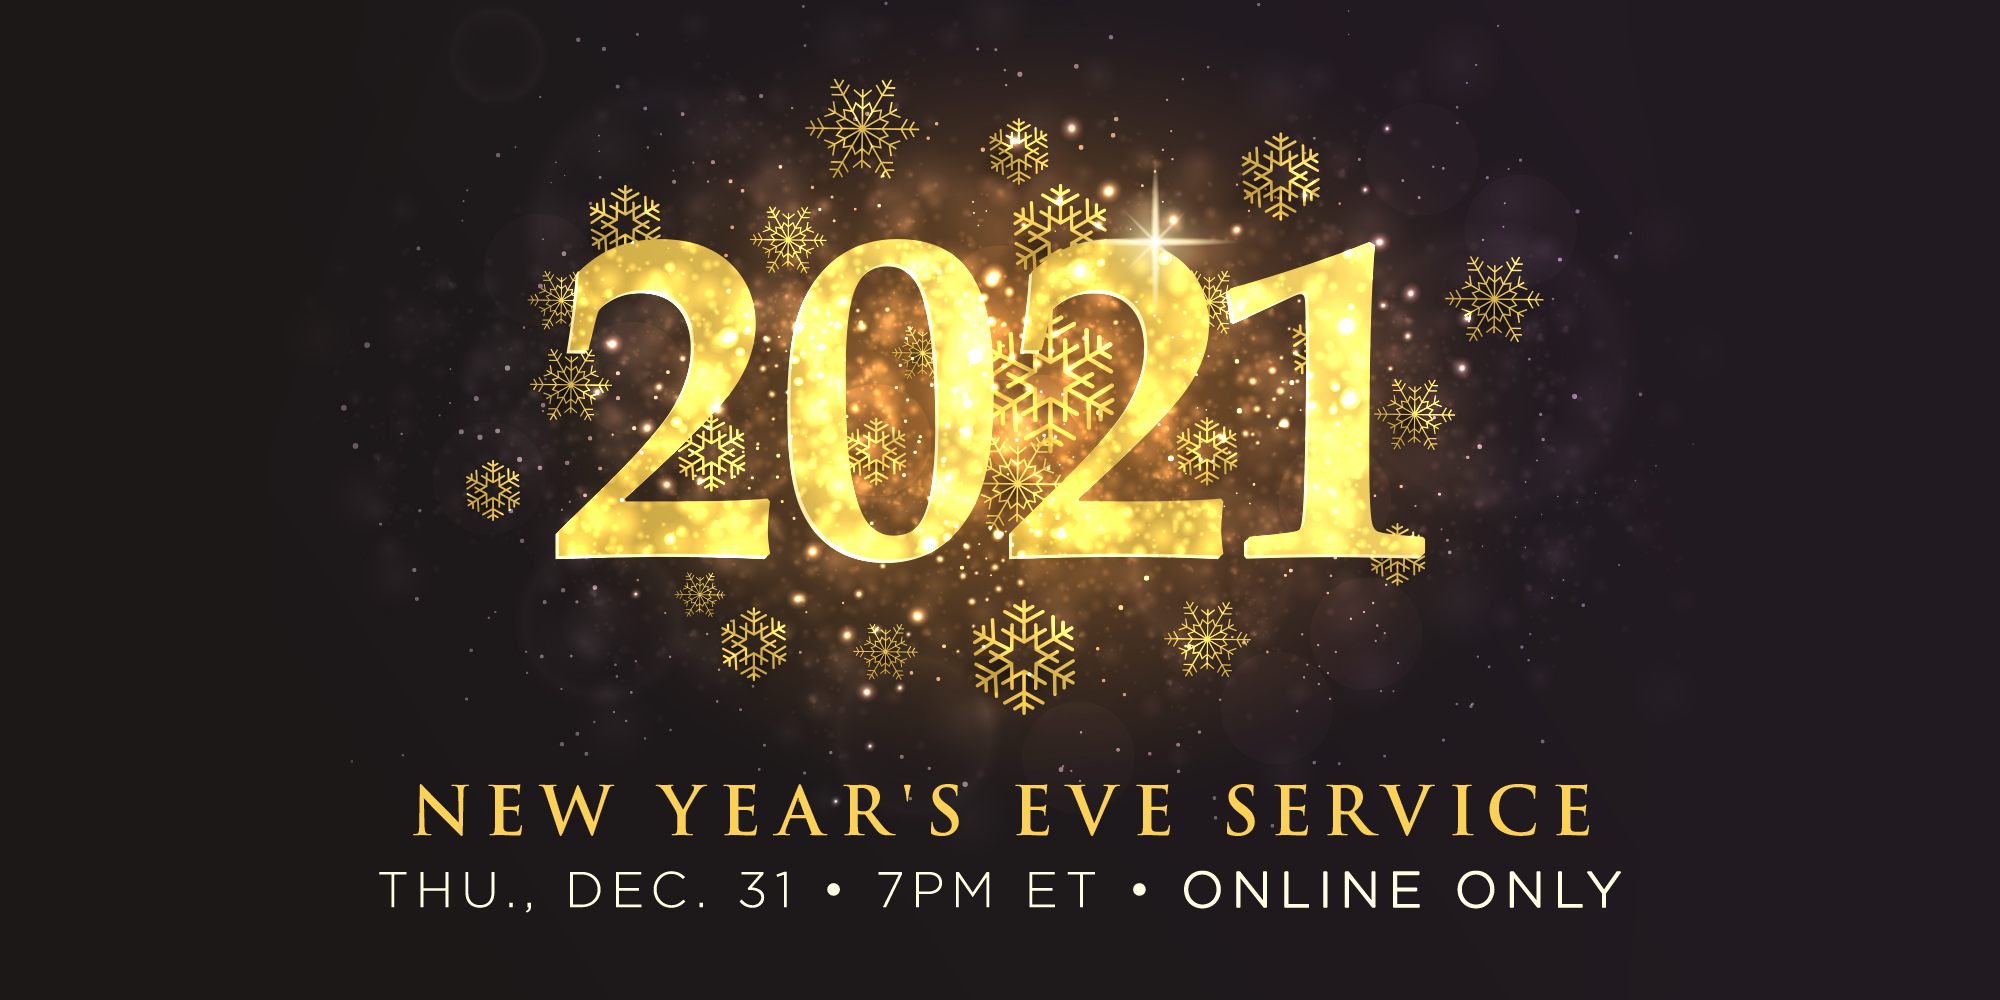 2021 New Year's Eve Service Thu Dec. 31